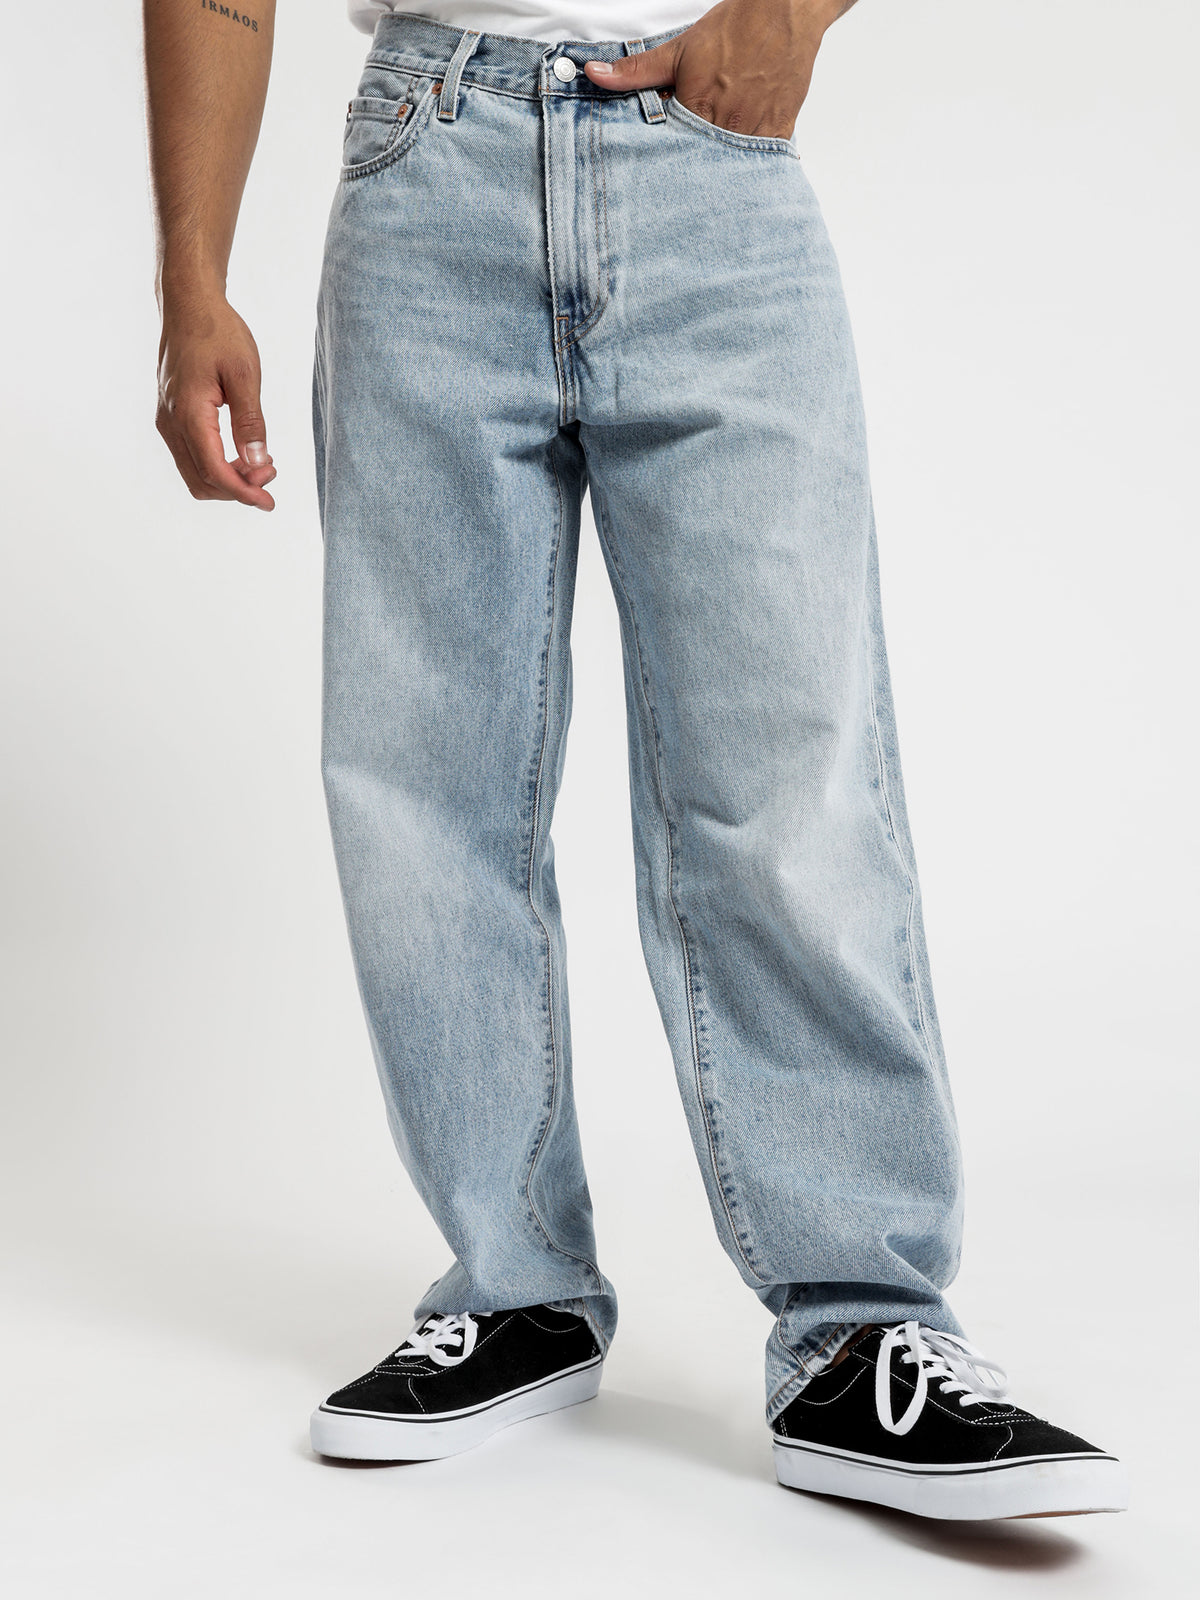 Stay Loose Jeans in Make Me